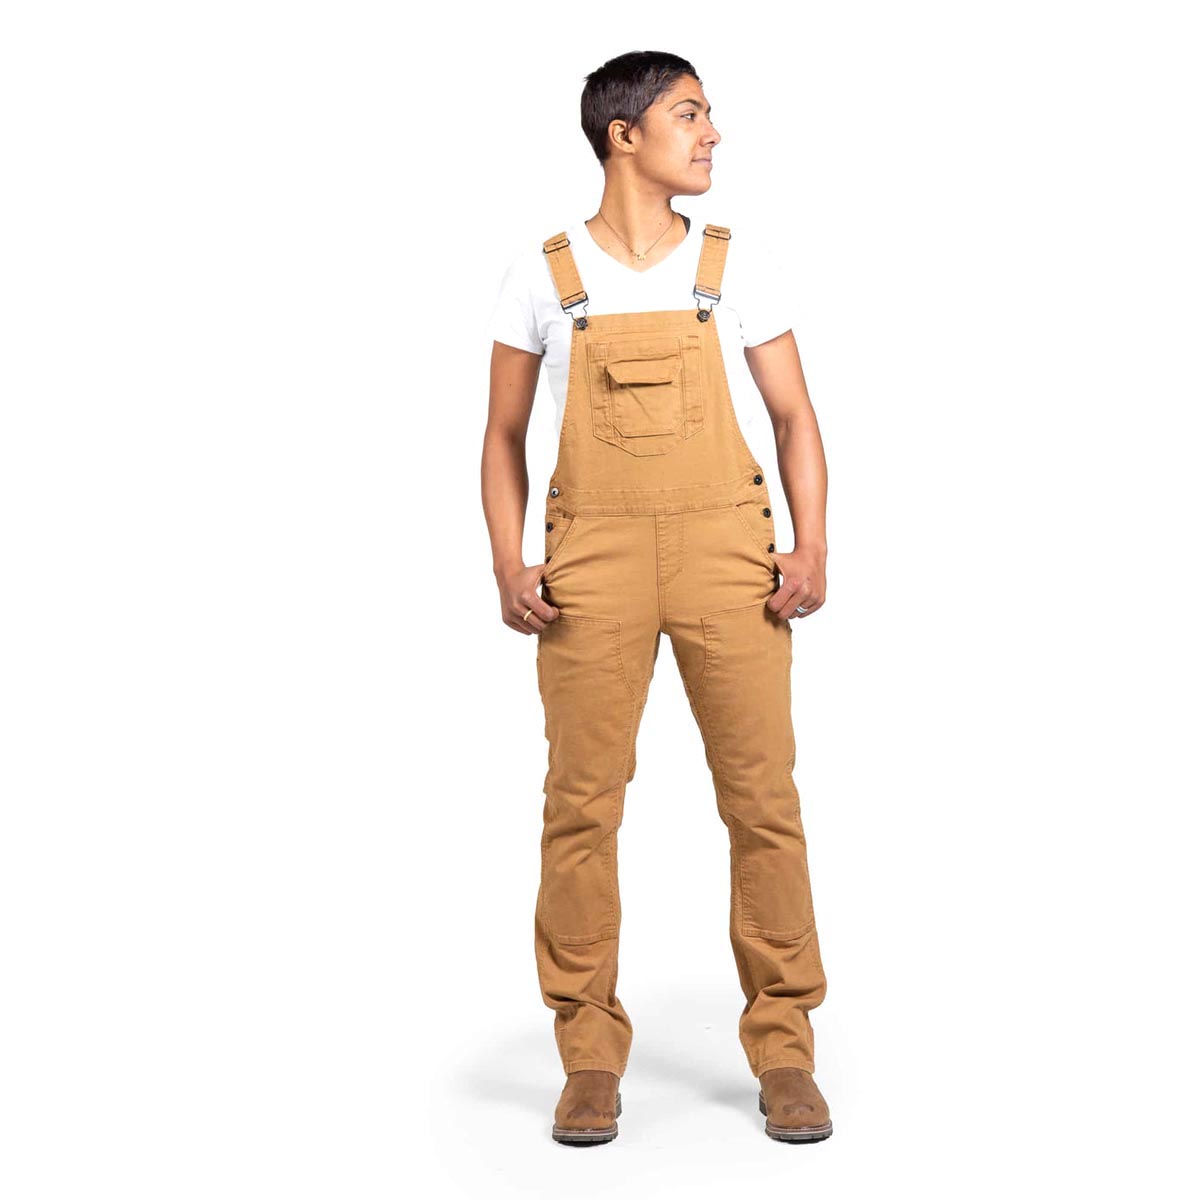 Dovetail Workwear Women's Freshley Overall - Saddle Brown